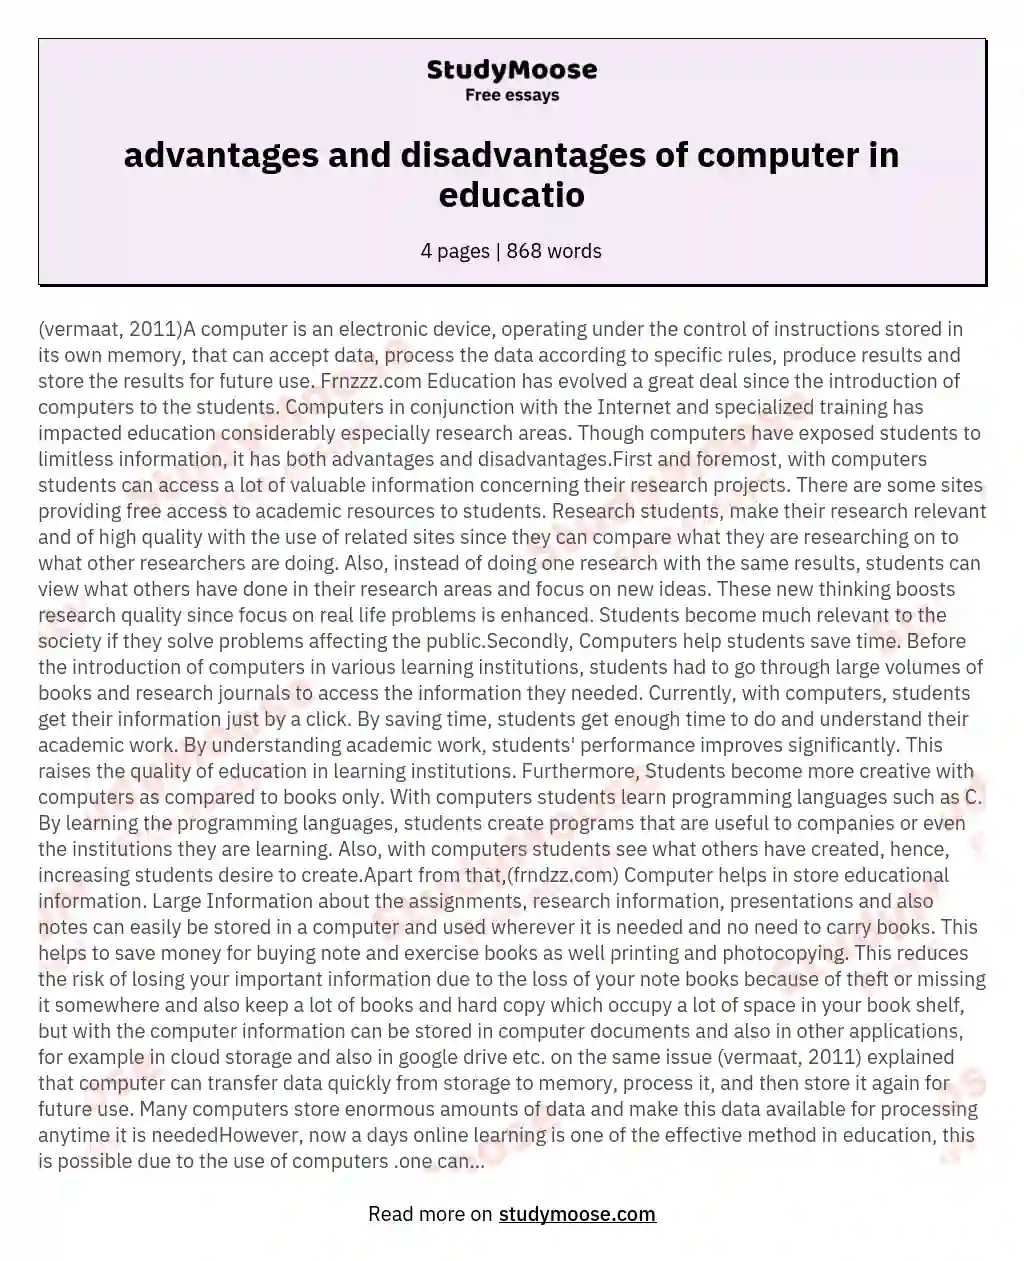 advantages and disadvantages of computer in educatio essay